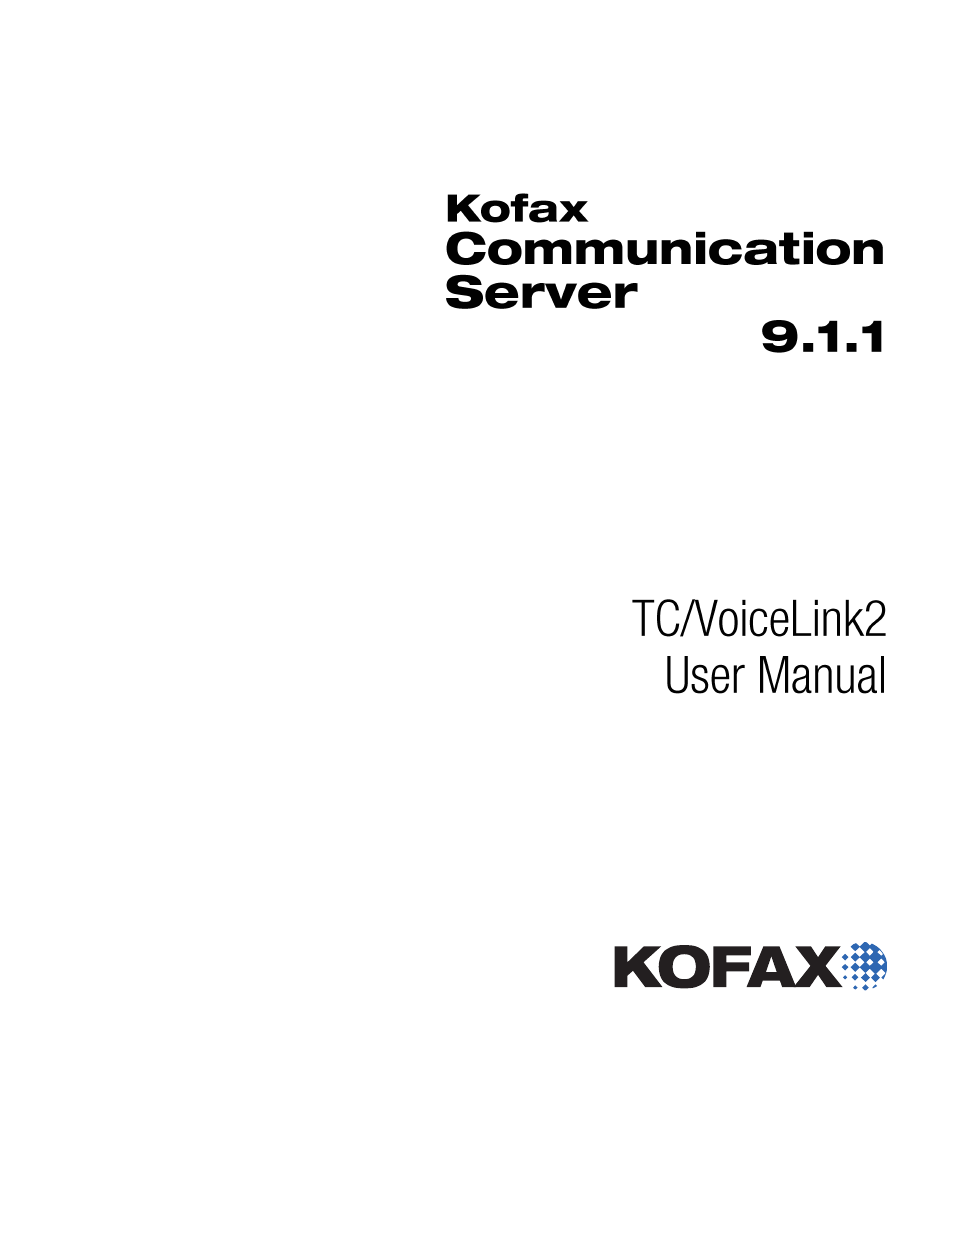 Kofax Communication Server 9.1.1 User Manual | 8 pages